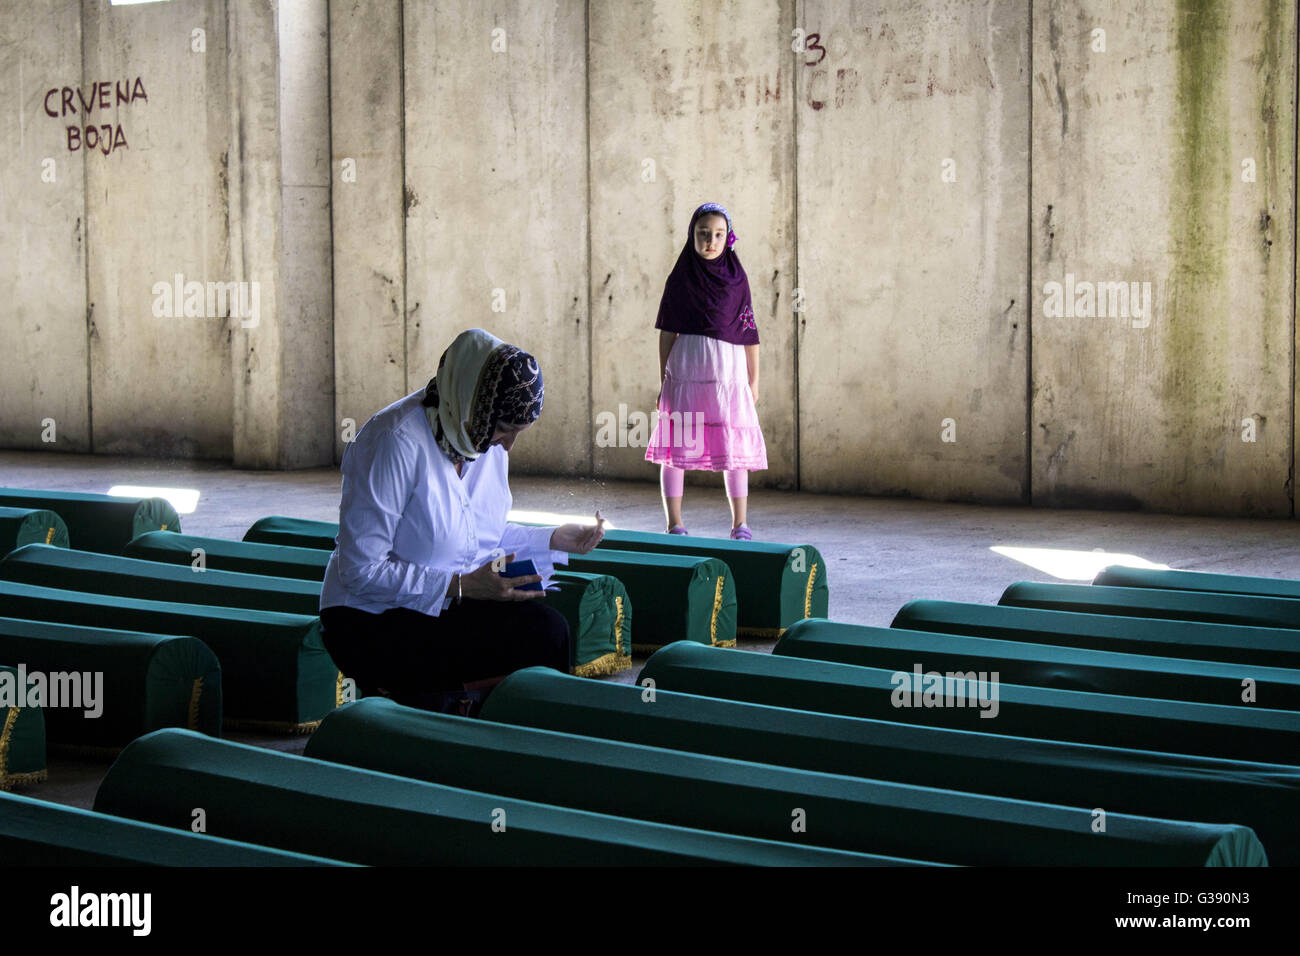 June 10, 2016 - PotoÄAri, Bosnia and Herzegovina - A file photo dated 10. July 2015. is showing women praying next to the coffins. As of now, 105 victims of Srebrenica massacre are going to be buried in Potocari during ceremonies marking the 21th anniversary of the massacre. During the war in Bosnia from 1992-95, 8,000 Muslim men and boys were executed by Bosnian Serb forces over five days and their bodies dumped in pits, then dug up and scattered in smaller pits. © Armin Durgut/ZUMA Wire/Alamy Live News Stock Photo